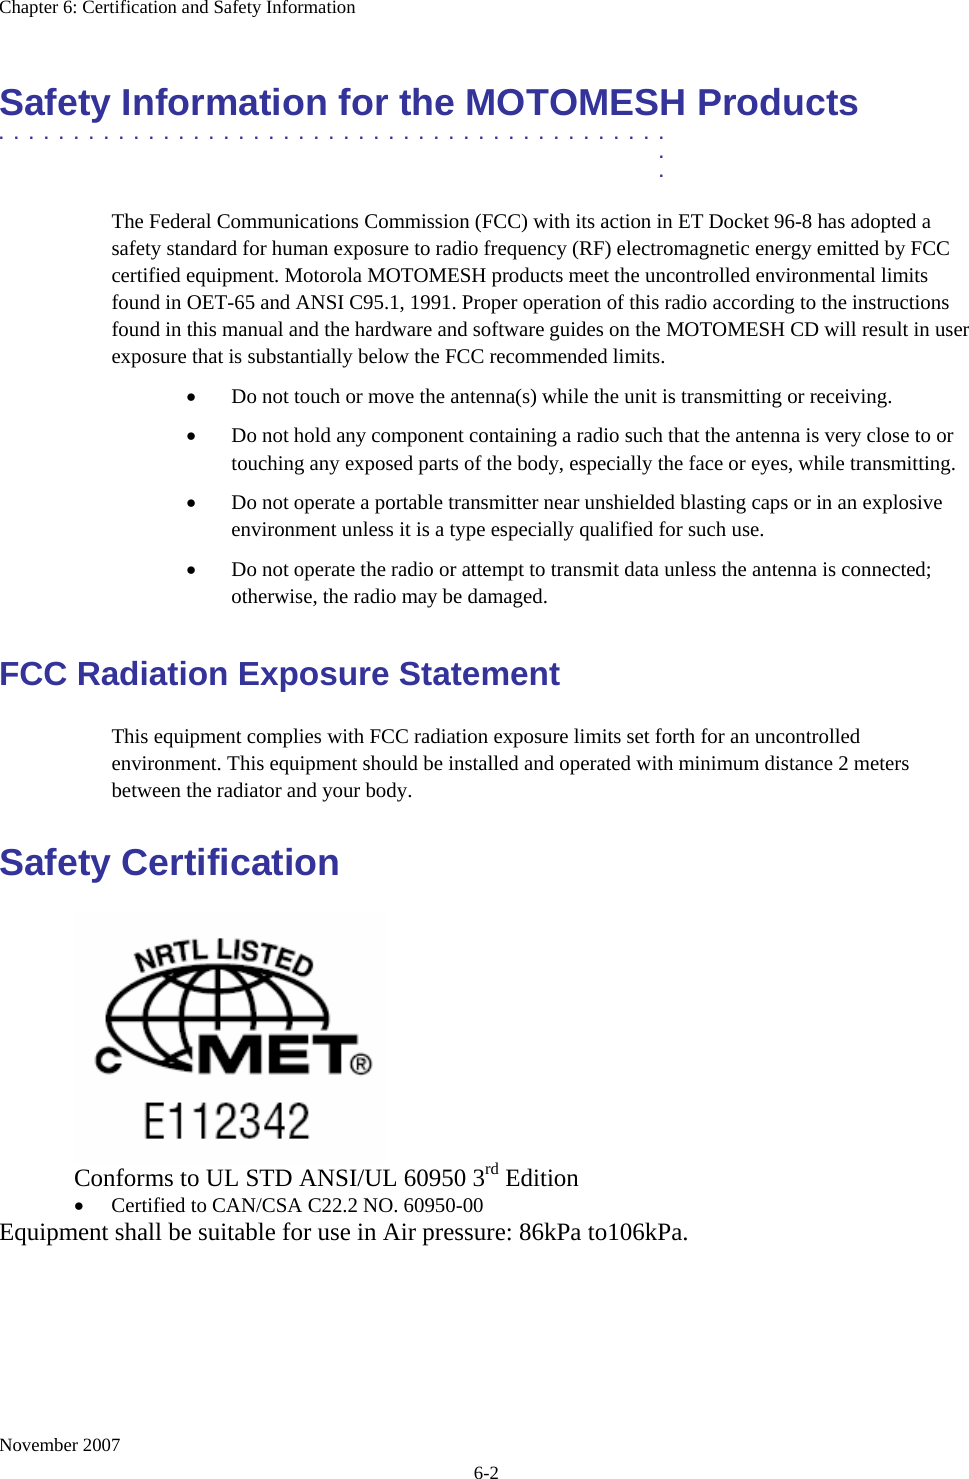 Chapter 6: Certification and Safety Information November 2007 6-2 Safety Information for the MOTOMESH Products .............................................  .  . The Federal Communications Commission (FCC) with its action in ET Docket 96-8 has adopted a safety standard for human exposure to radio frequency (RF) electromagnetic energy emitted by FCC certified equipment. Motorola MOTOMESH products meet the uncontrolled environmental limits found in OET-65 and ANSI C95.1, 1991. Proper operation of this radio according to the instructions found in this manual and the hardware and software guides on the MOTOMESH CD will result in user exposure that is substantially below the FCC recommended limits.  • Do not touch or move the antenna(s) while the unit is transmitting or receiving. • Do not hold any component containing a radio such that the antenna is very close to or touching any exposed parts of the body, especially the face or eyes, while transmitting. • Do not operate a portable transmitter near unshielded blasting caps or in an explosive environment unless it is a type especially qualified for such use. • Do not operate the radio or attempt to transmit data unless the antenna is connected; otherwise, the radio may be damaged. FCC Radiation Exposure Statement This equipment complies with FCC radiation exposure limits set forth for an uncontrolled environment. This equipment should be installed and operated with minimum distance 2 meters between the radiator and your body. Safety Certification    Conforms to UL STD ANSI/UL 60950 3rd Edition  • Certified to CAN/CSA C22.2 NO. 60950-00 Equipment shall be suitable for use in Air pressure: 86kPa to106kPa. 